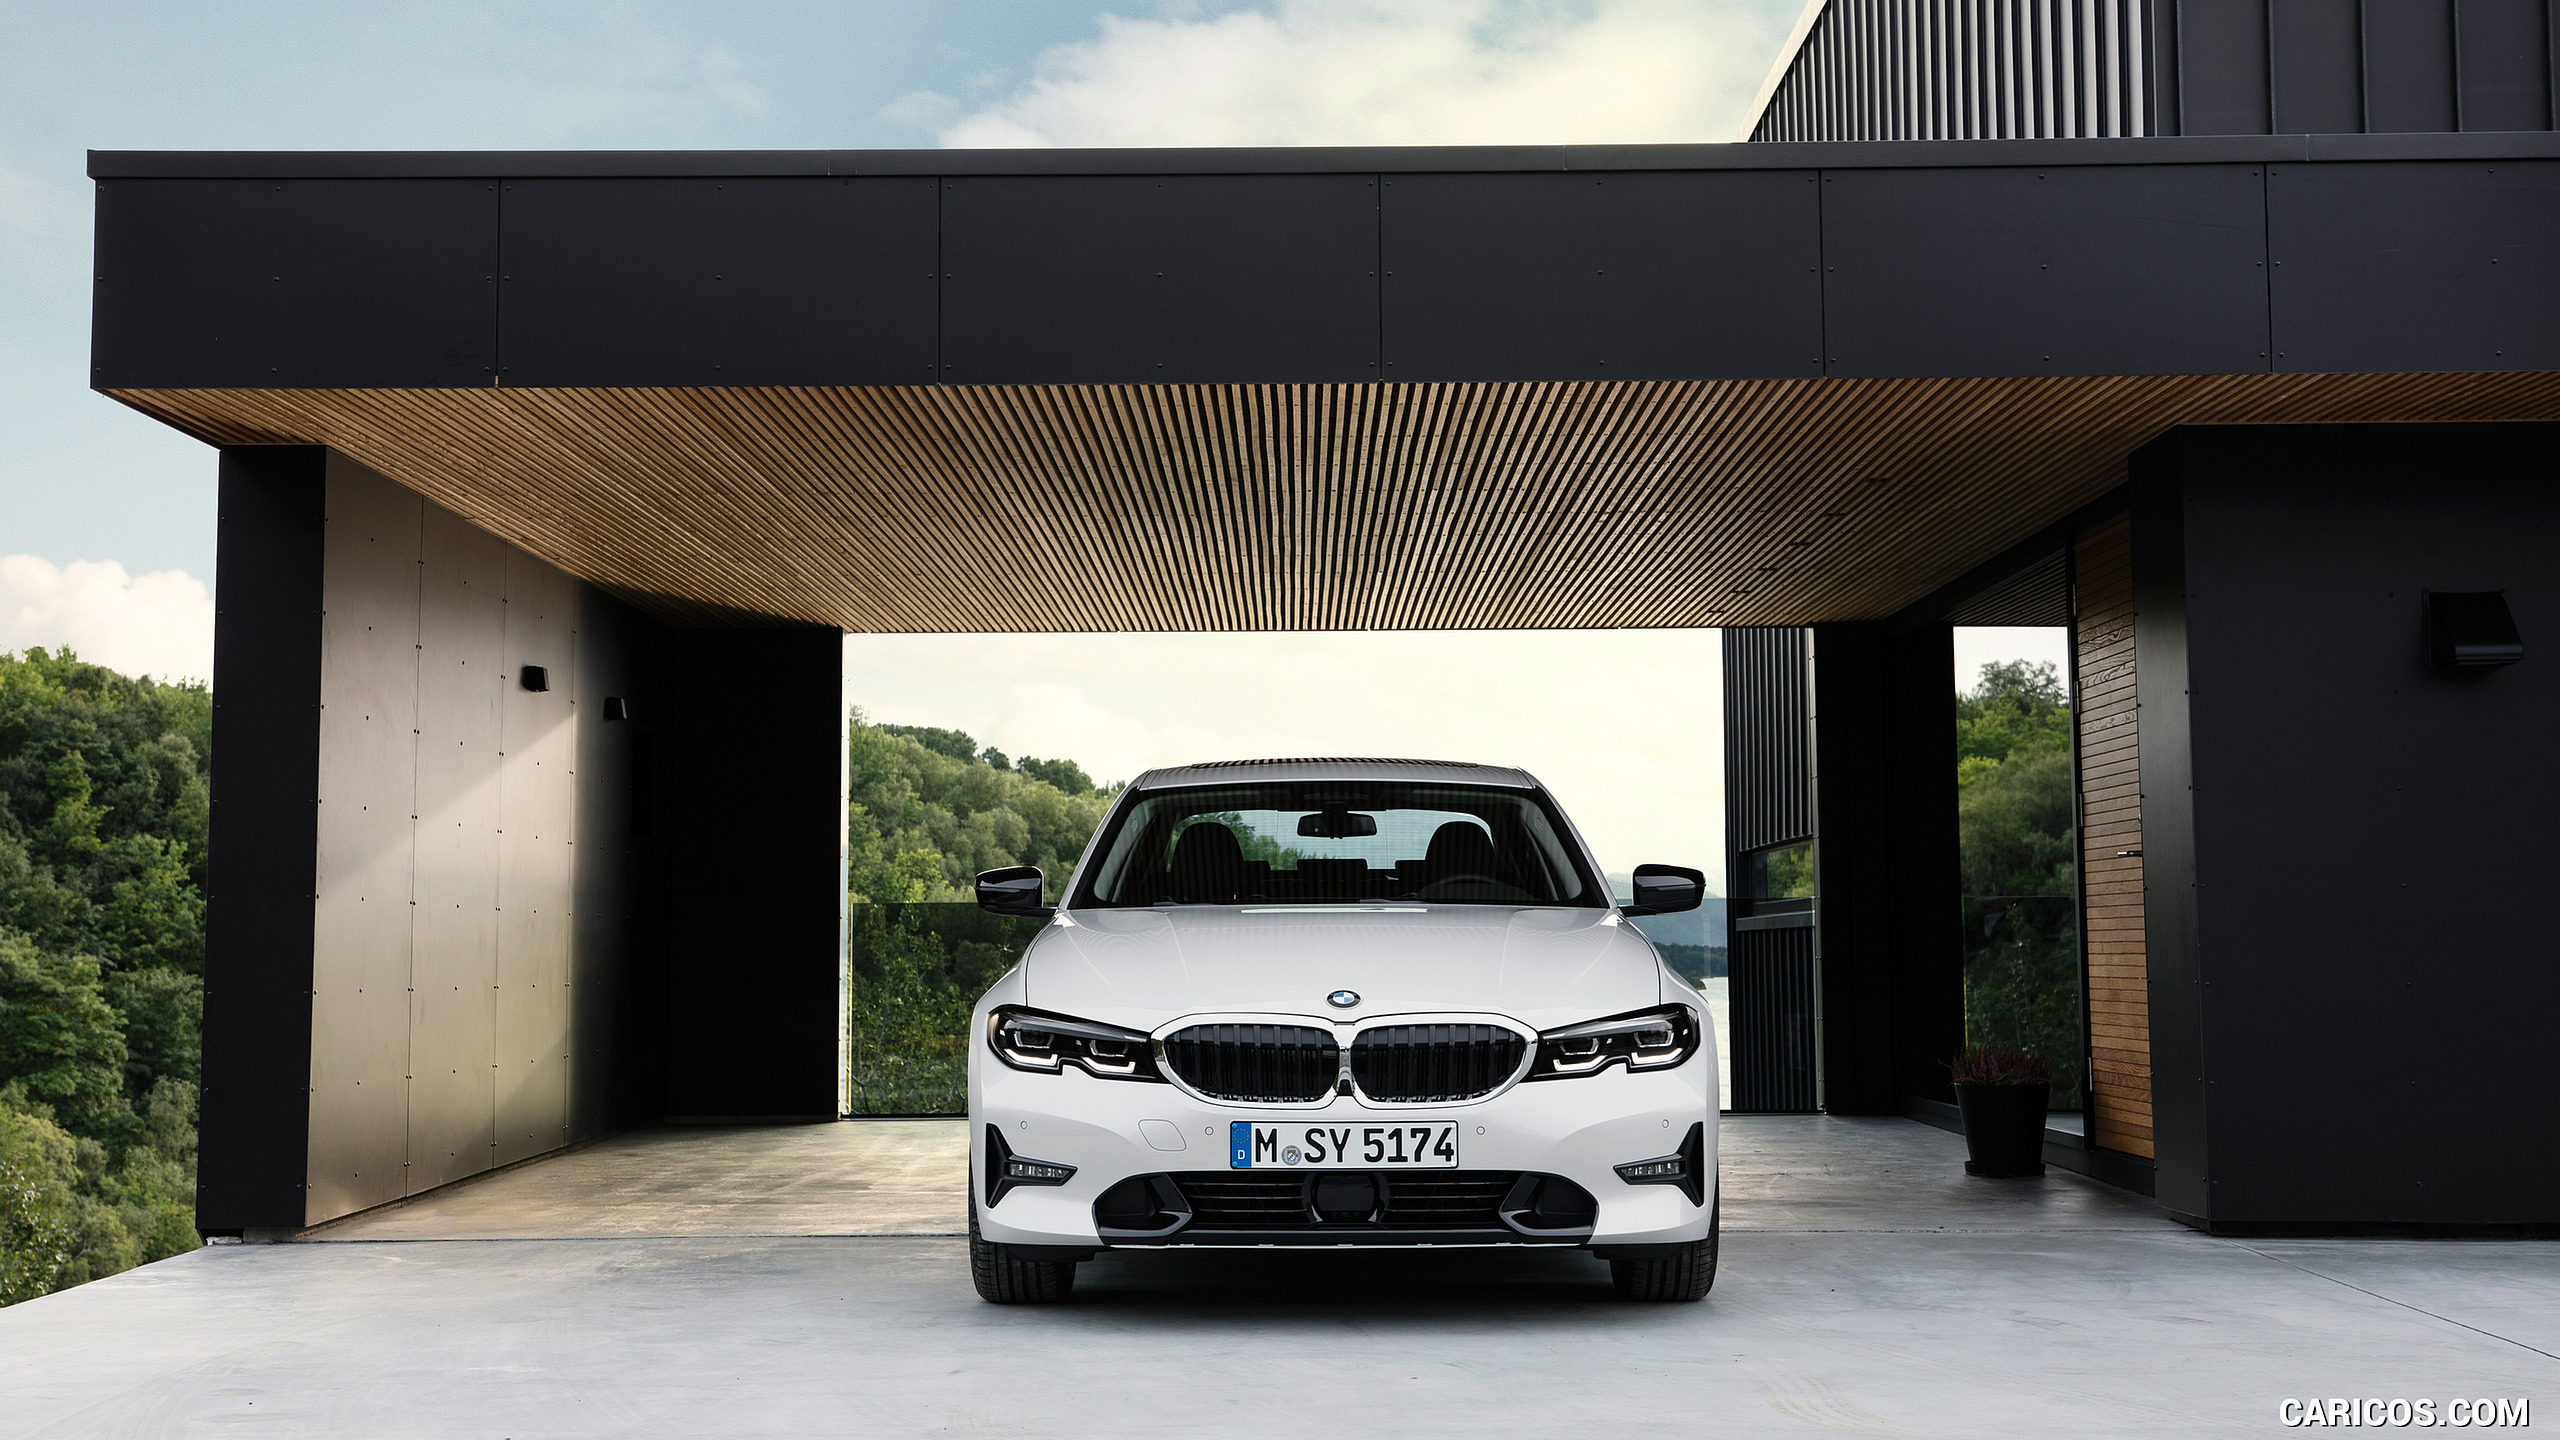 Free download 2019 BMW 3 Series Front HD Wallpaper 55 [2560x1440] for your Desktop, Mobile & Tablet. Explore BMW 3 Series 2019 Wallpaper. BMW 3 Series 2019 Wallpaper, BMW 3 Series Wallpaper, BMW 3 Series Wallpaper